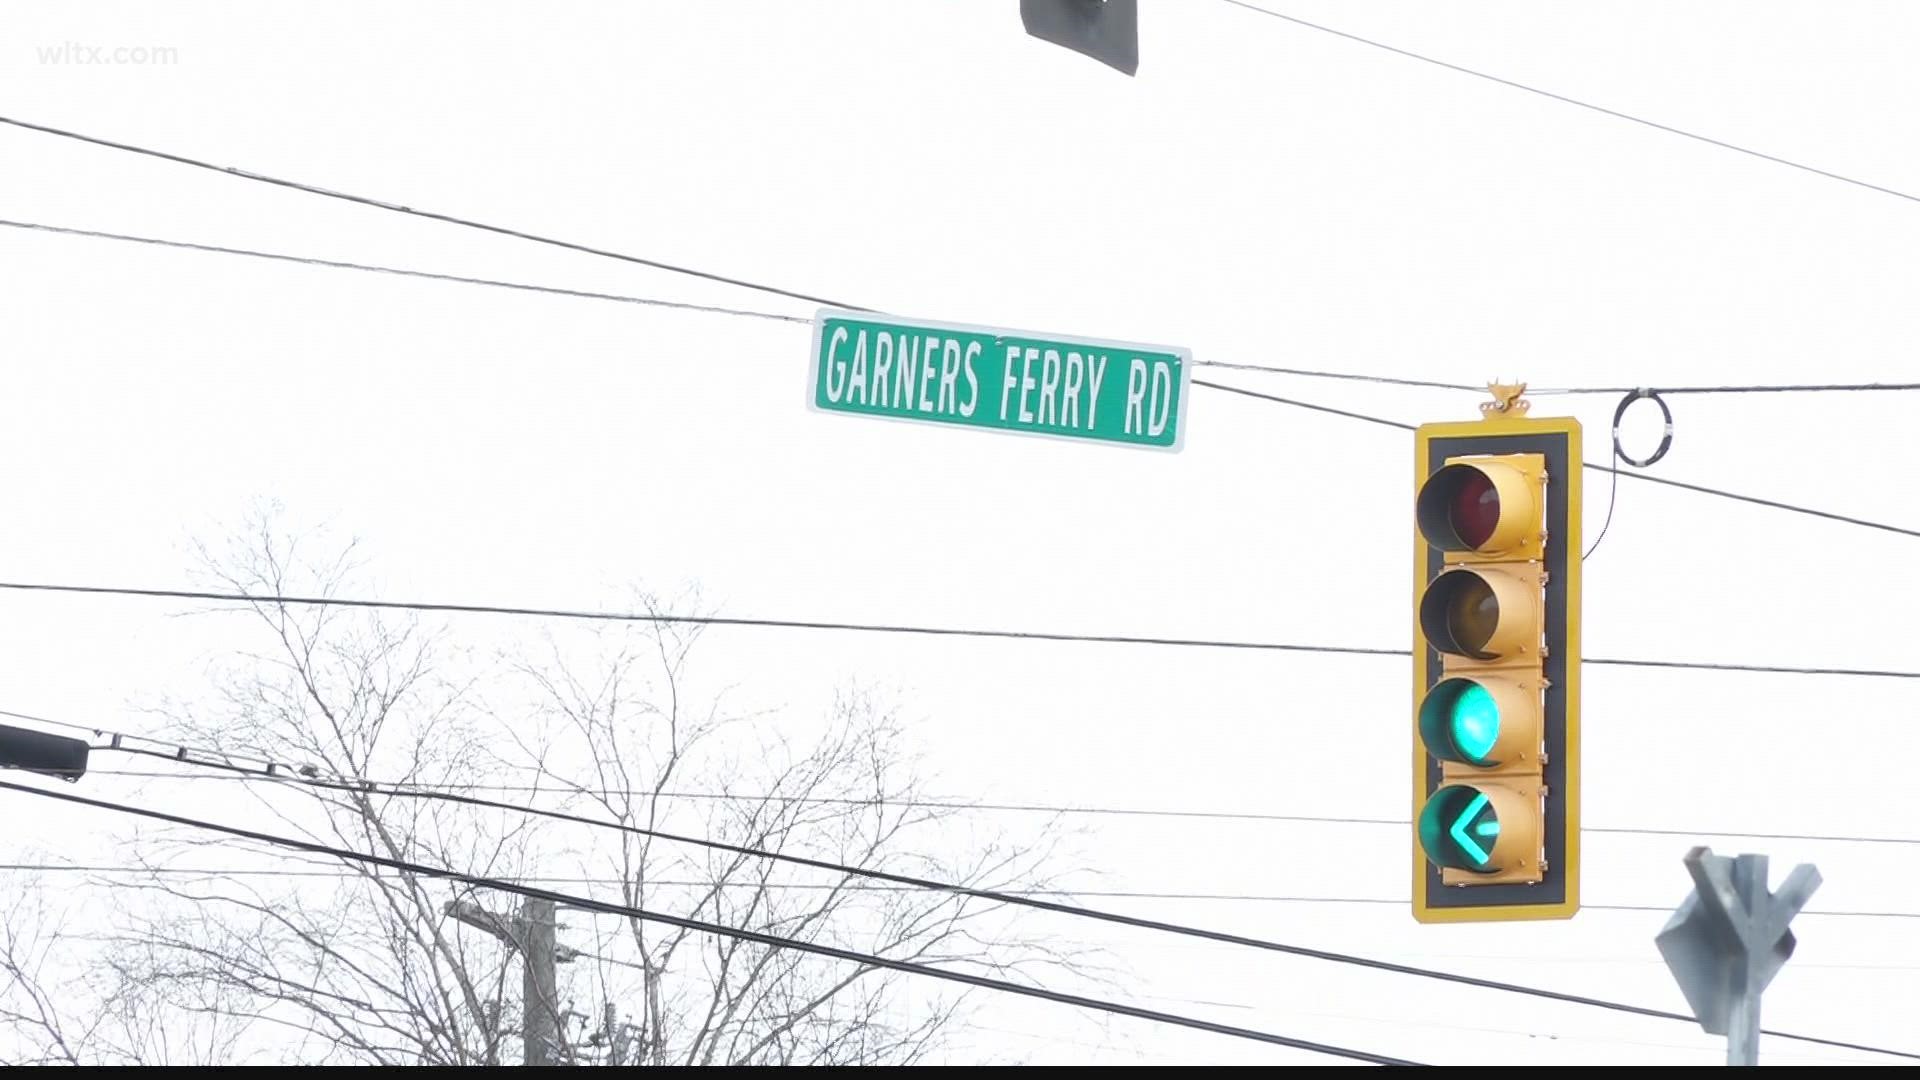 Proposed housing and commercial developments along Lower Richland Boulevard at Garners Ferry can proceed with plans after infrastructure request approved.